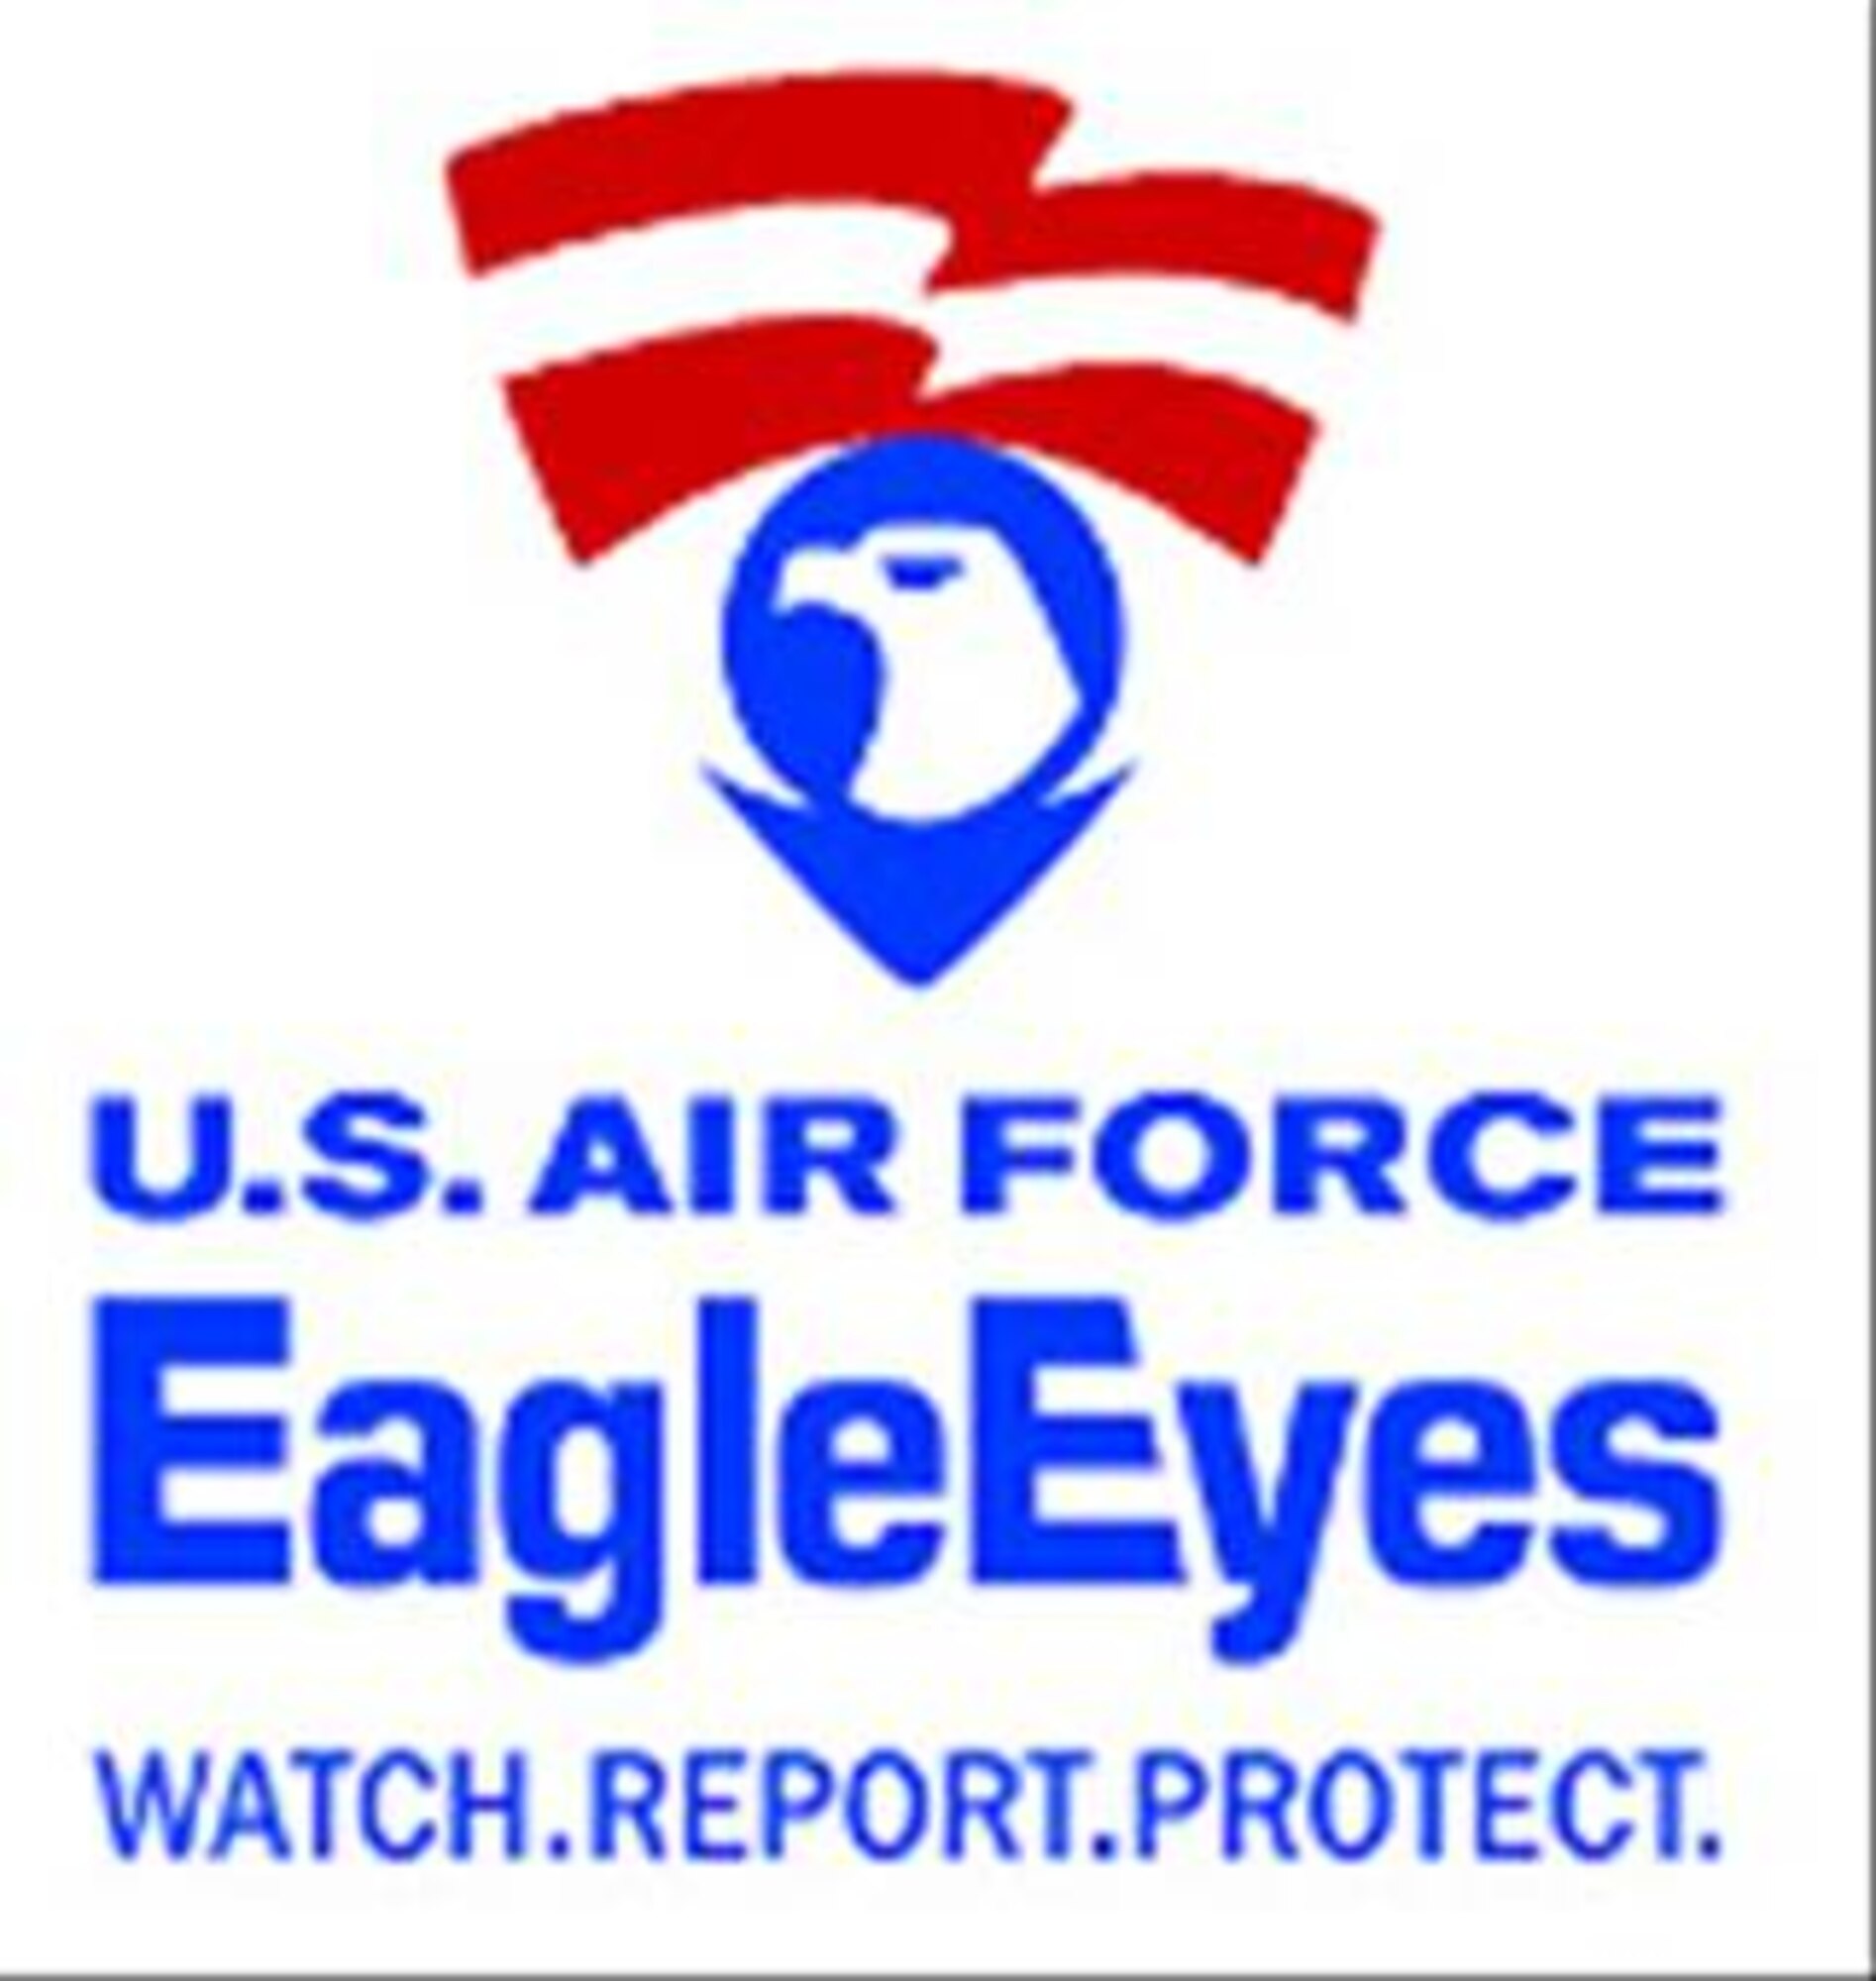 Every citizen, military or civilian, can have a positive effect in the ongoing war on terrorism. The Eagle Eyes program is an anti-terrorism initiative that enlists the eyes and ears of Air Force members and citizens in local community against the war on terror. If you observe any suspicious activity, anytime during the day or night, you can call Homestead Air Reserve Base's Air Force Office of Special Investigations at 224-7900.